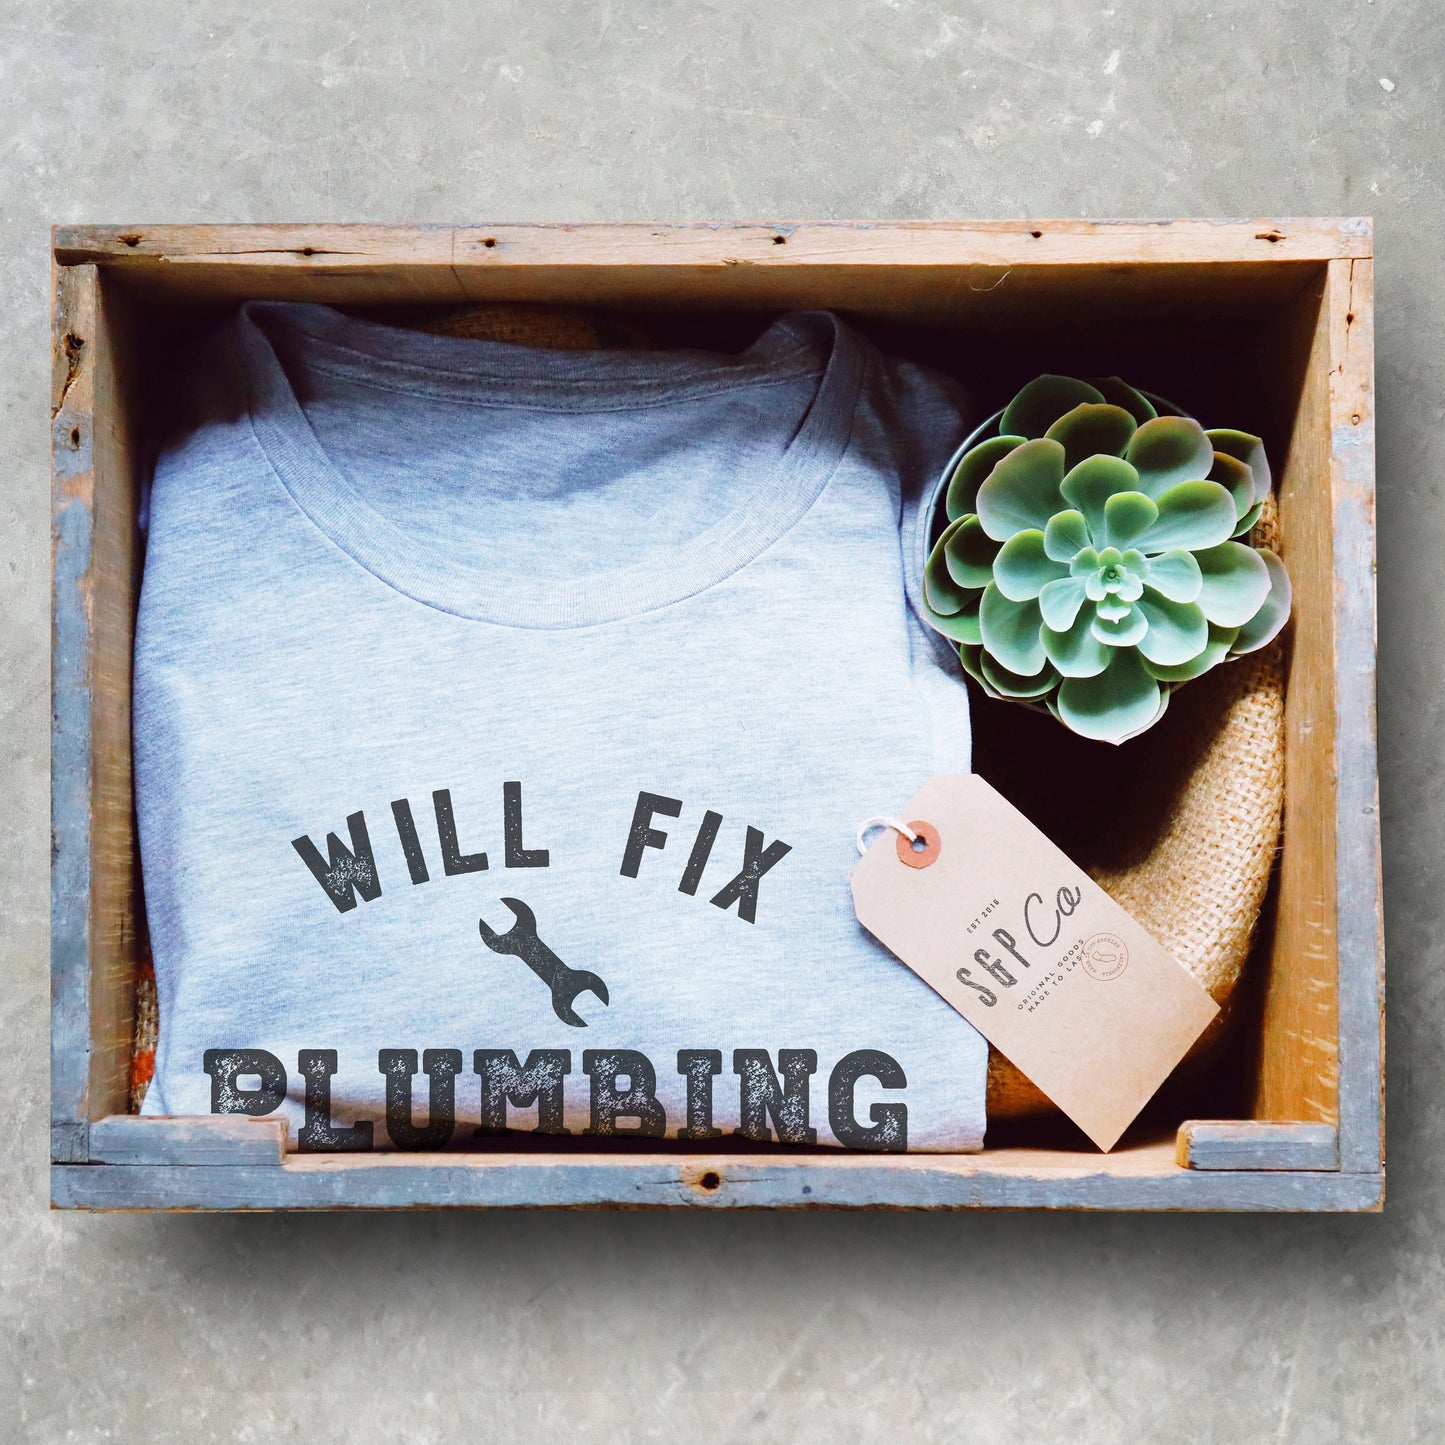 Will Fix Plumbing For Beer Unisex Shirt - Plumber, Plumber T-Shirt, Plumbing Shirt, Plumber Gift, Fathers Day Gift, Gift For Dad